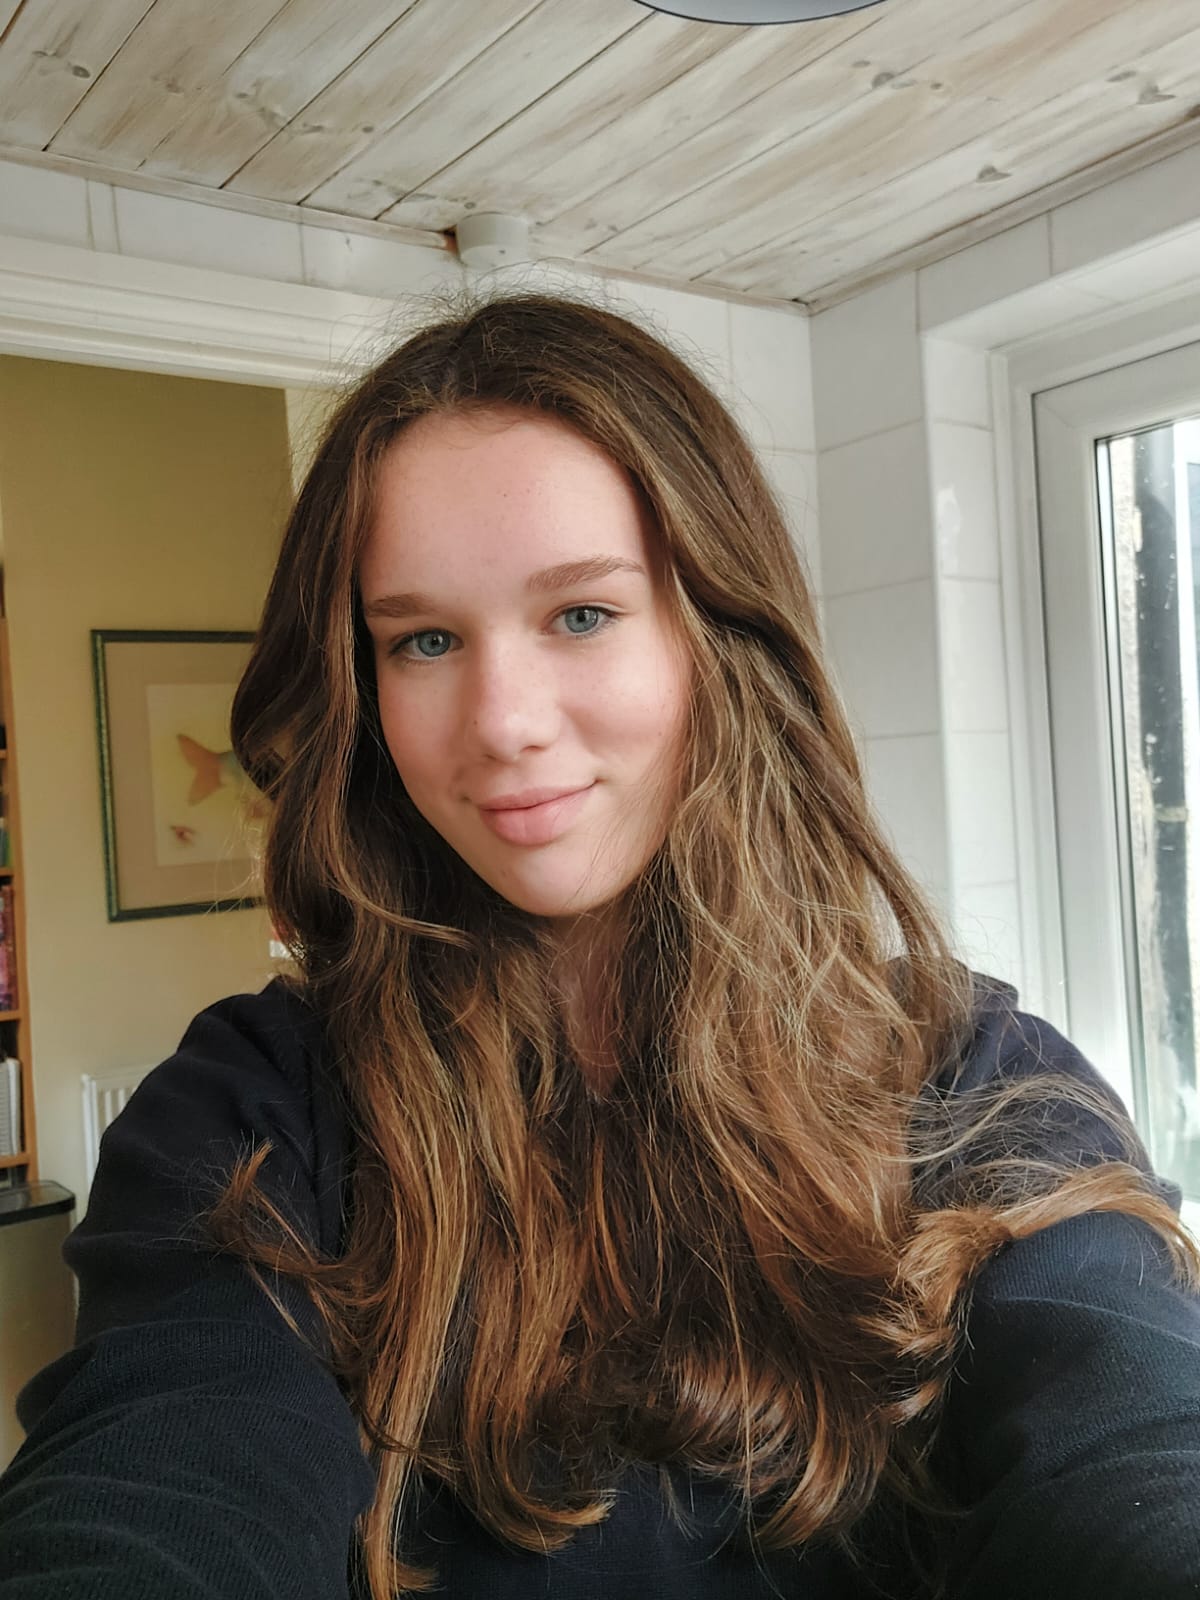 This image shows Hannah, a teenage girl with long brown hair who's smiling at the camera. She's taking the selfie in a room with tiled walls. She wears a long sleeved black jumper.